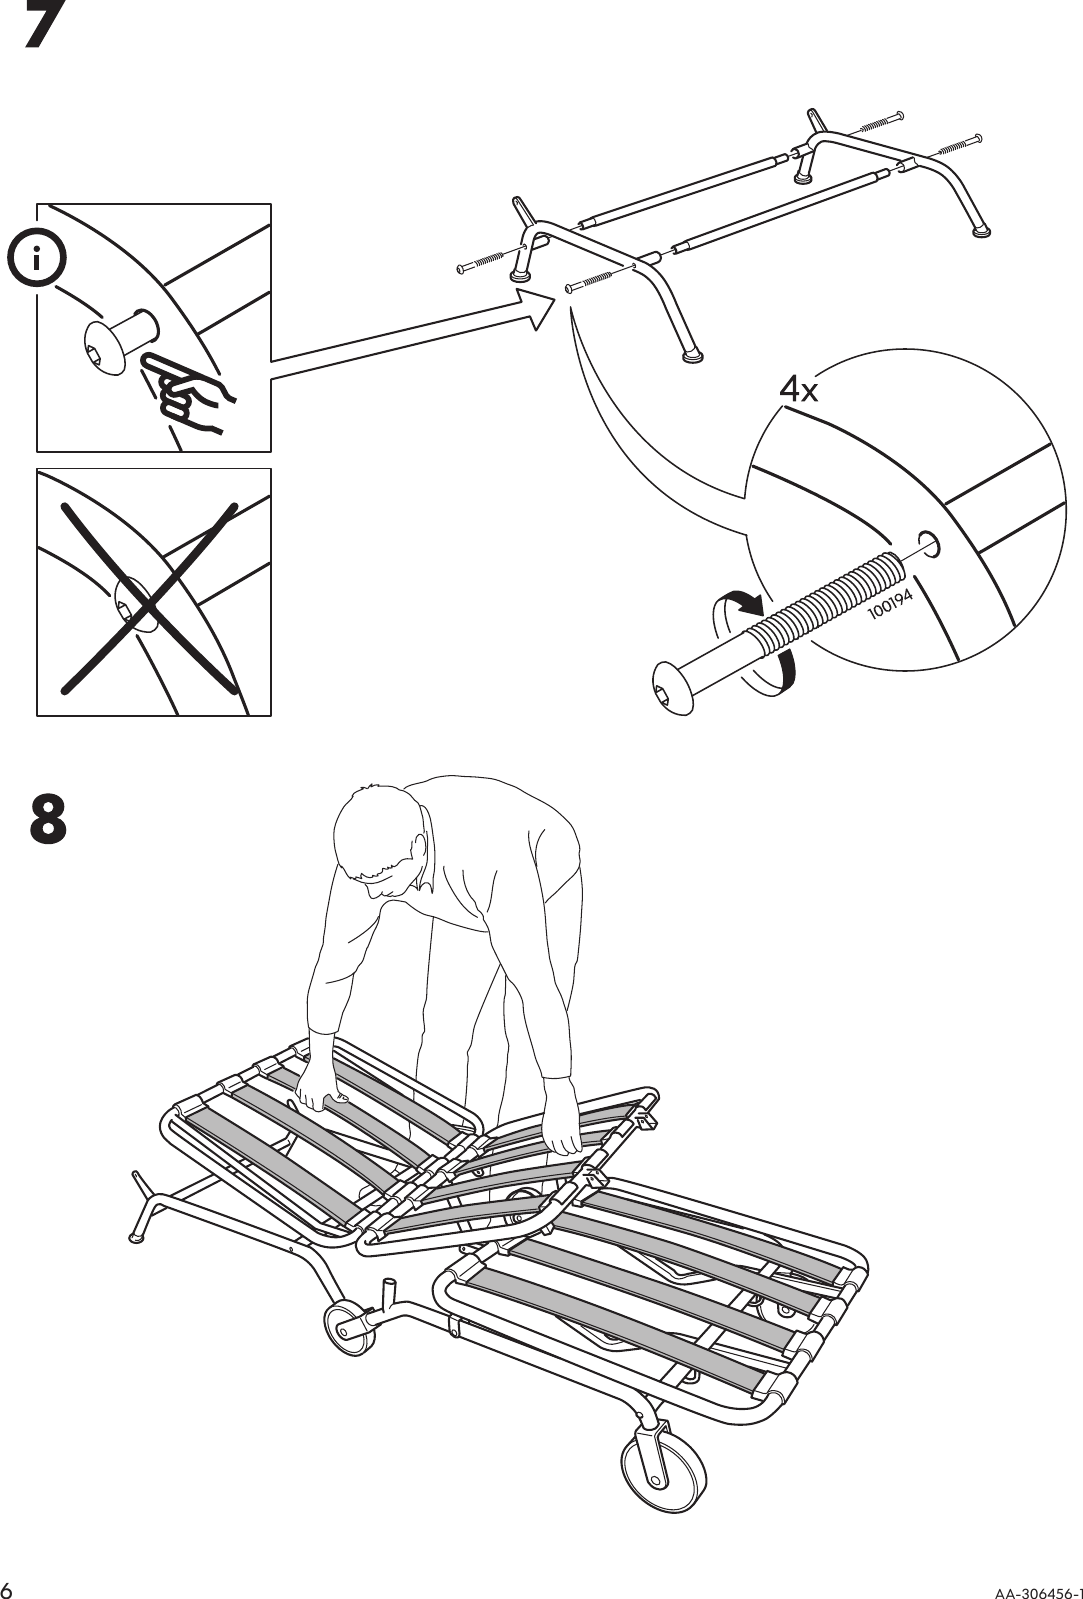 Page 6 of 12 - Ikea Ikea-Ikea-Ps-Chair-Bed-Frame-Assembly-Instruction